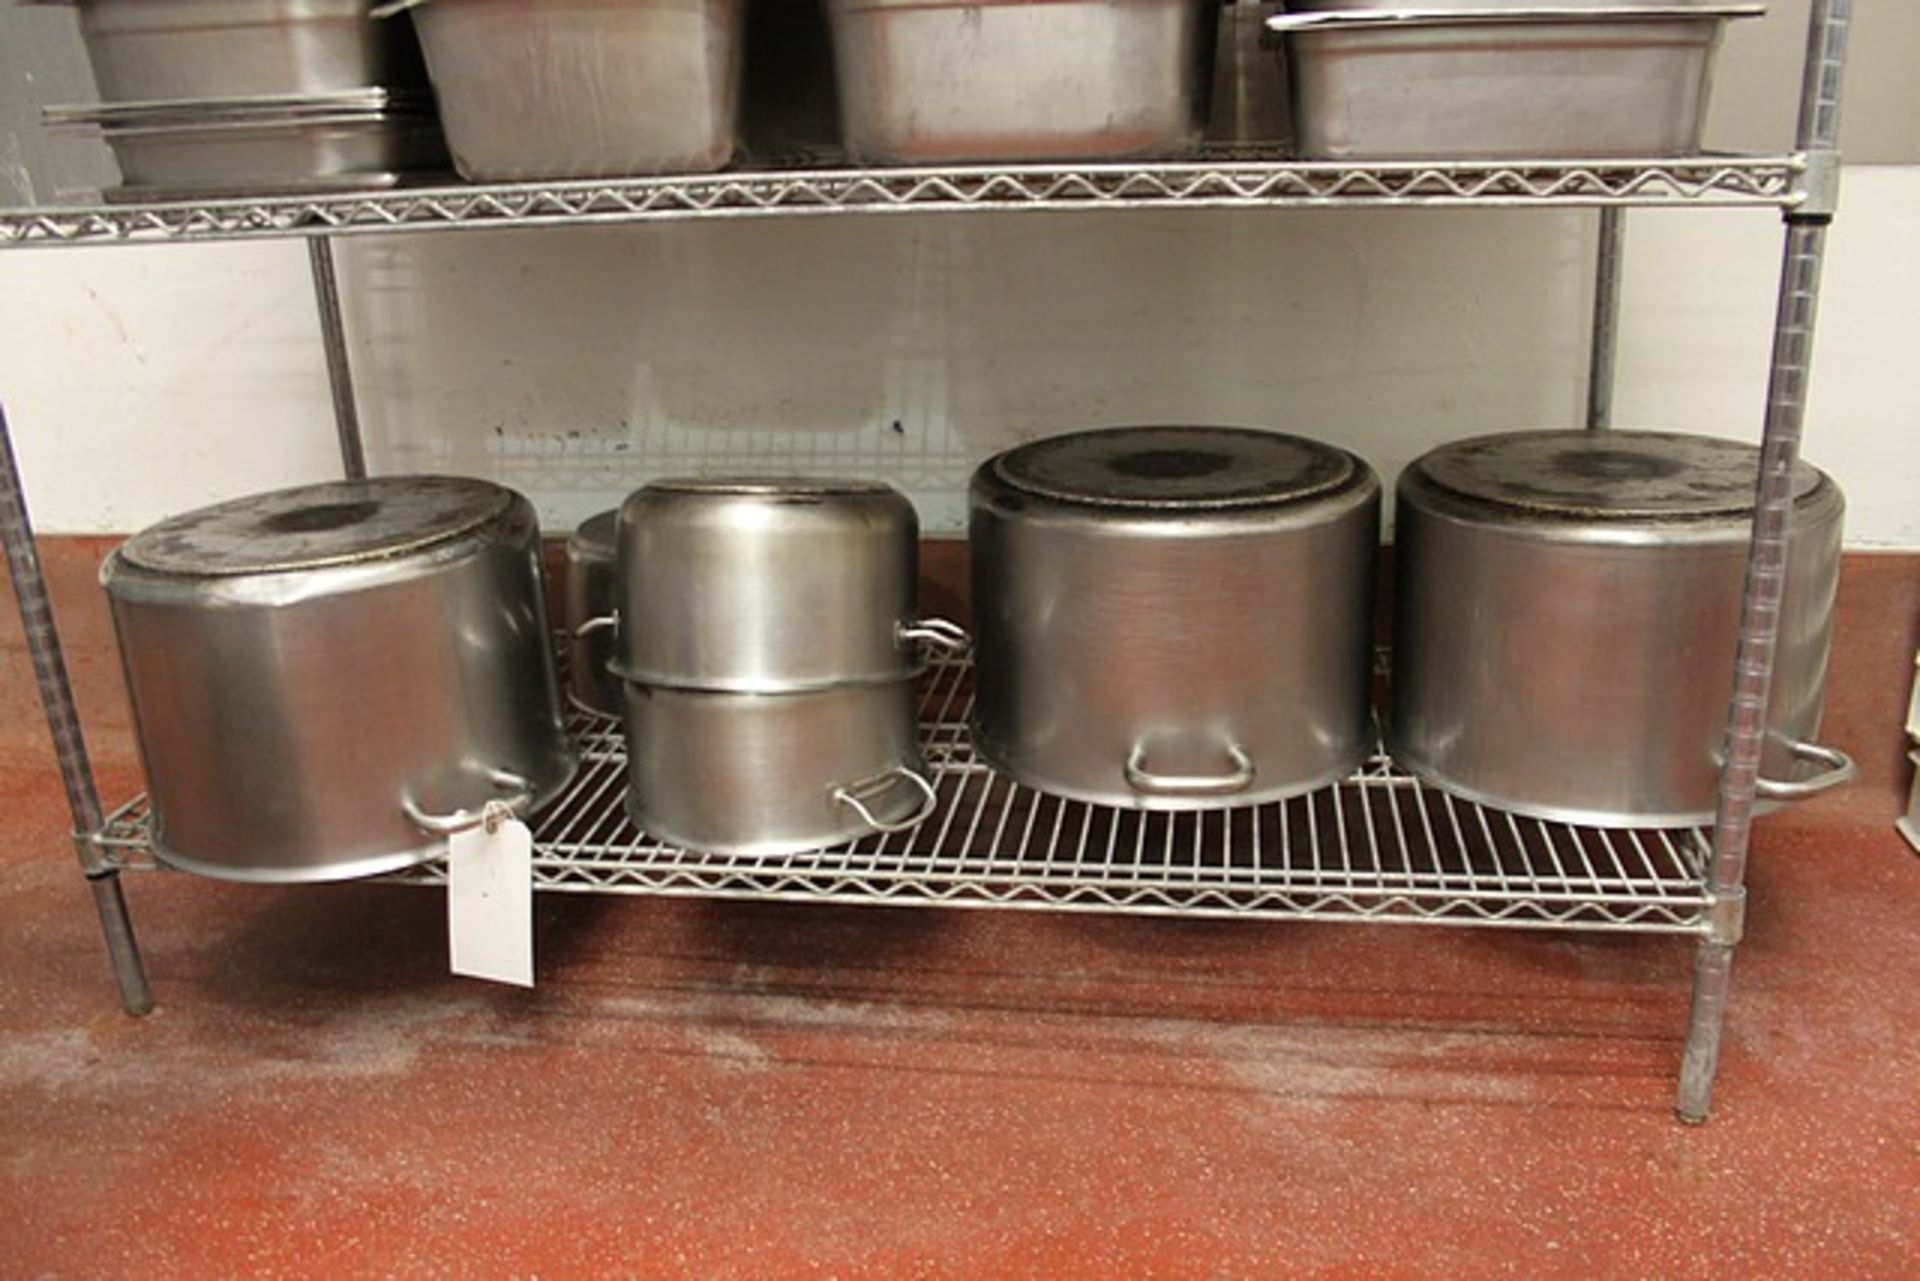 6 x stainless steel stock pots 3 x 400mm, 2 x 300mm and 1 x 270mm stock pots